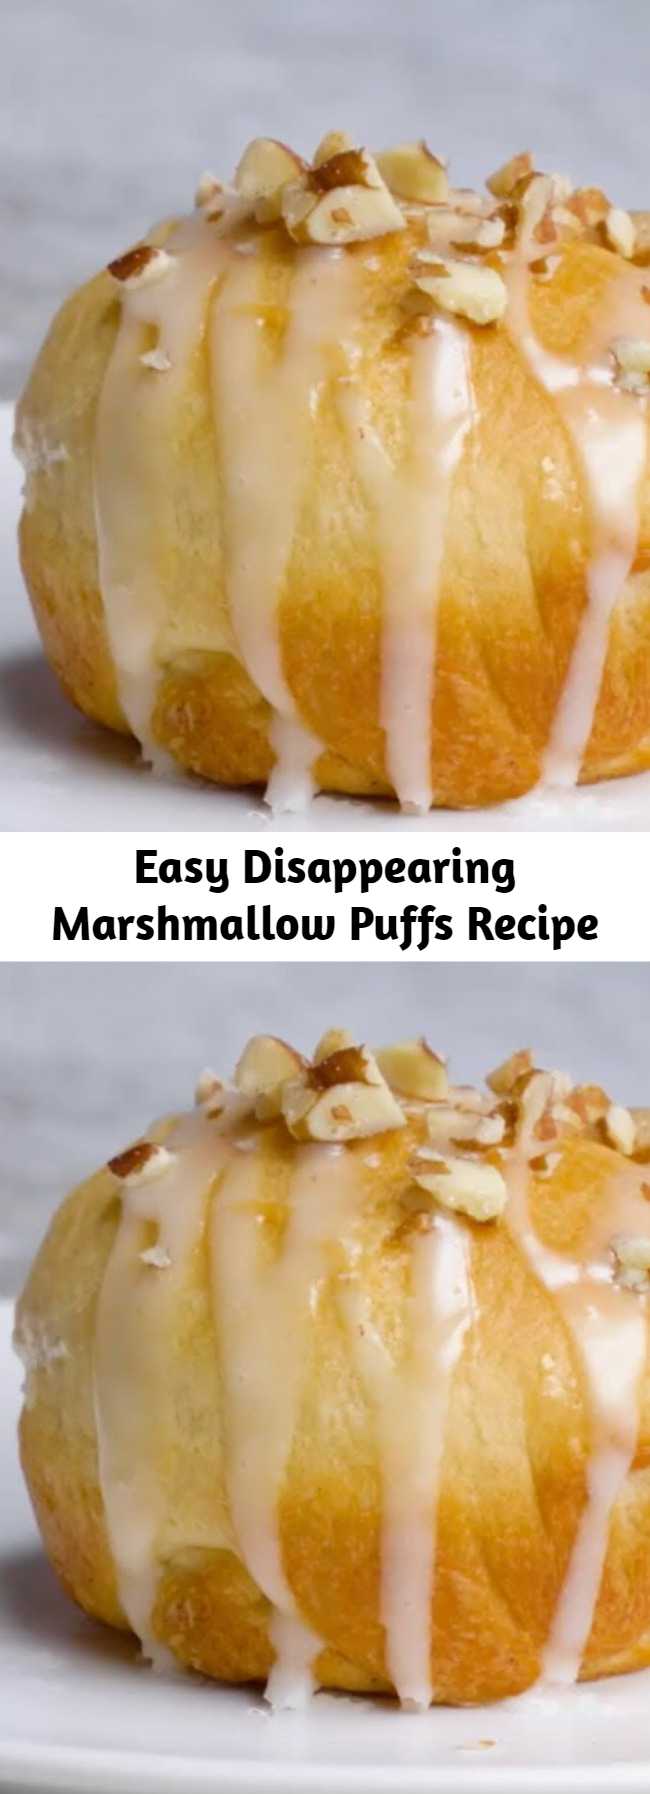 Easy Disappearing Marshmallow Puffs Recipe - Kids love making these tasty treats for Sunday breakfast. While baking, the marshmallows melt and blend with the cinnamon-sugar.